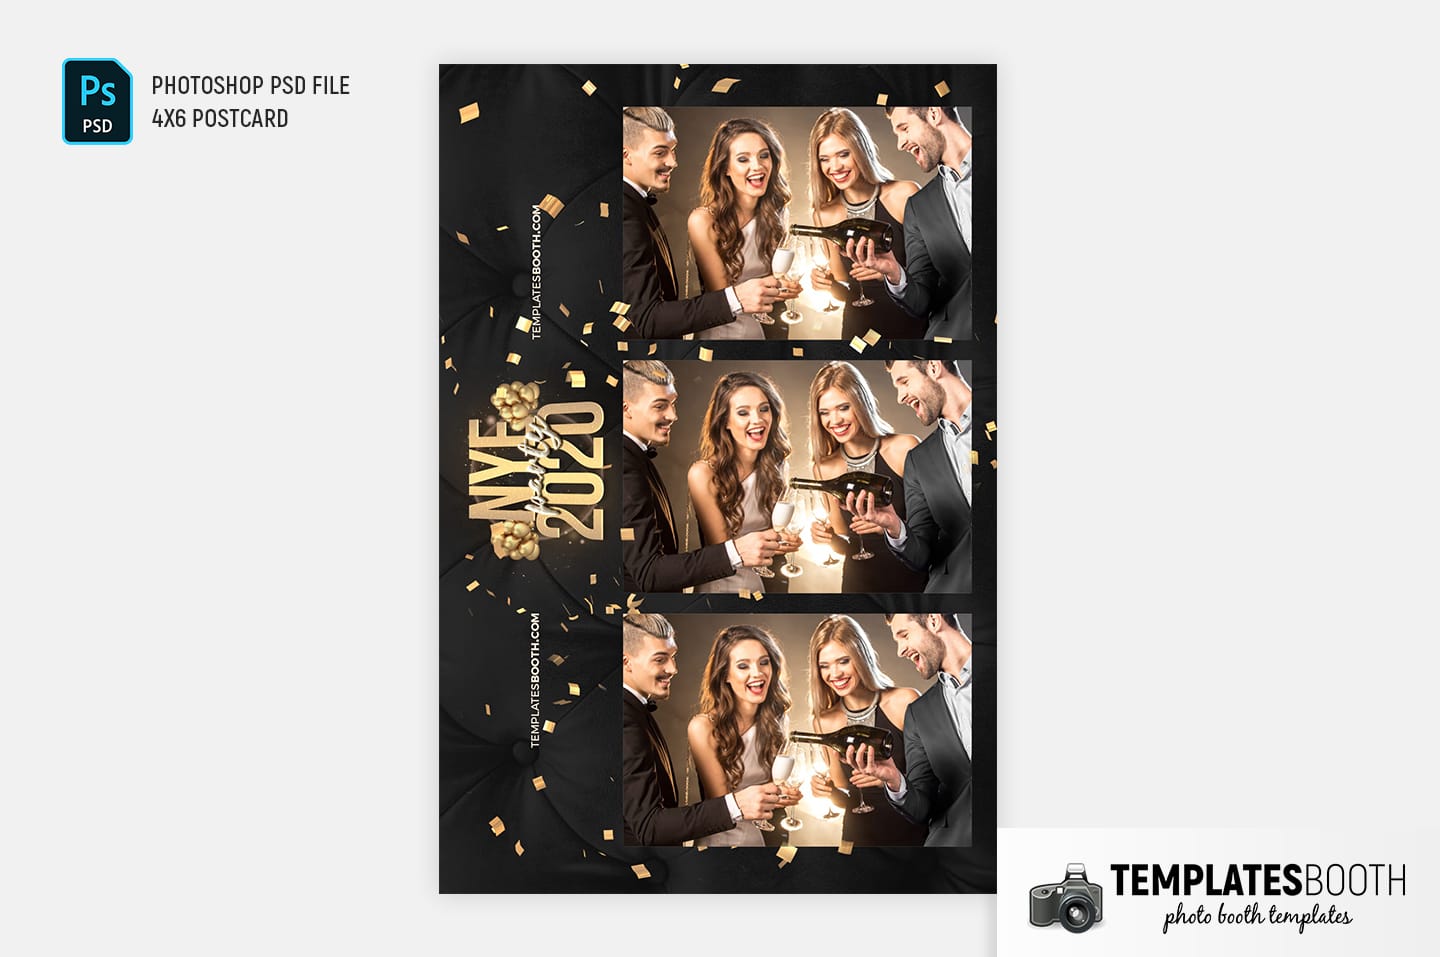 New Year's Eve Photo Booth Template (4x6 postcard)